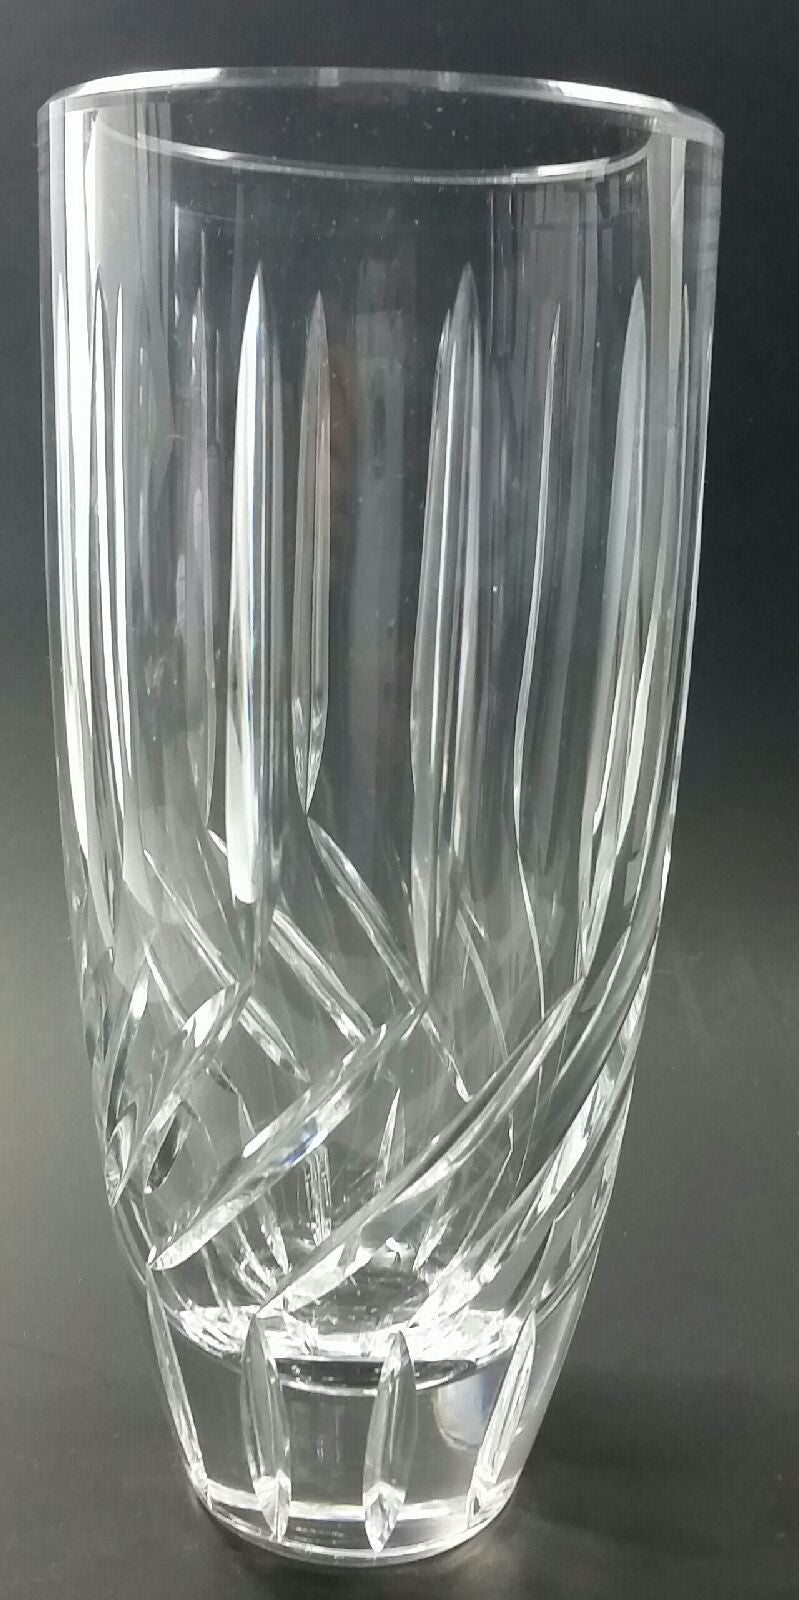 ORourke Hand cut glass vase - O'Rourke crystal awards & gifts abp cut glass